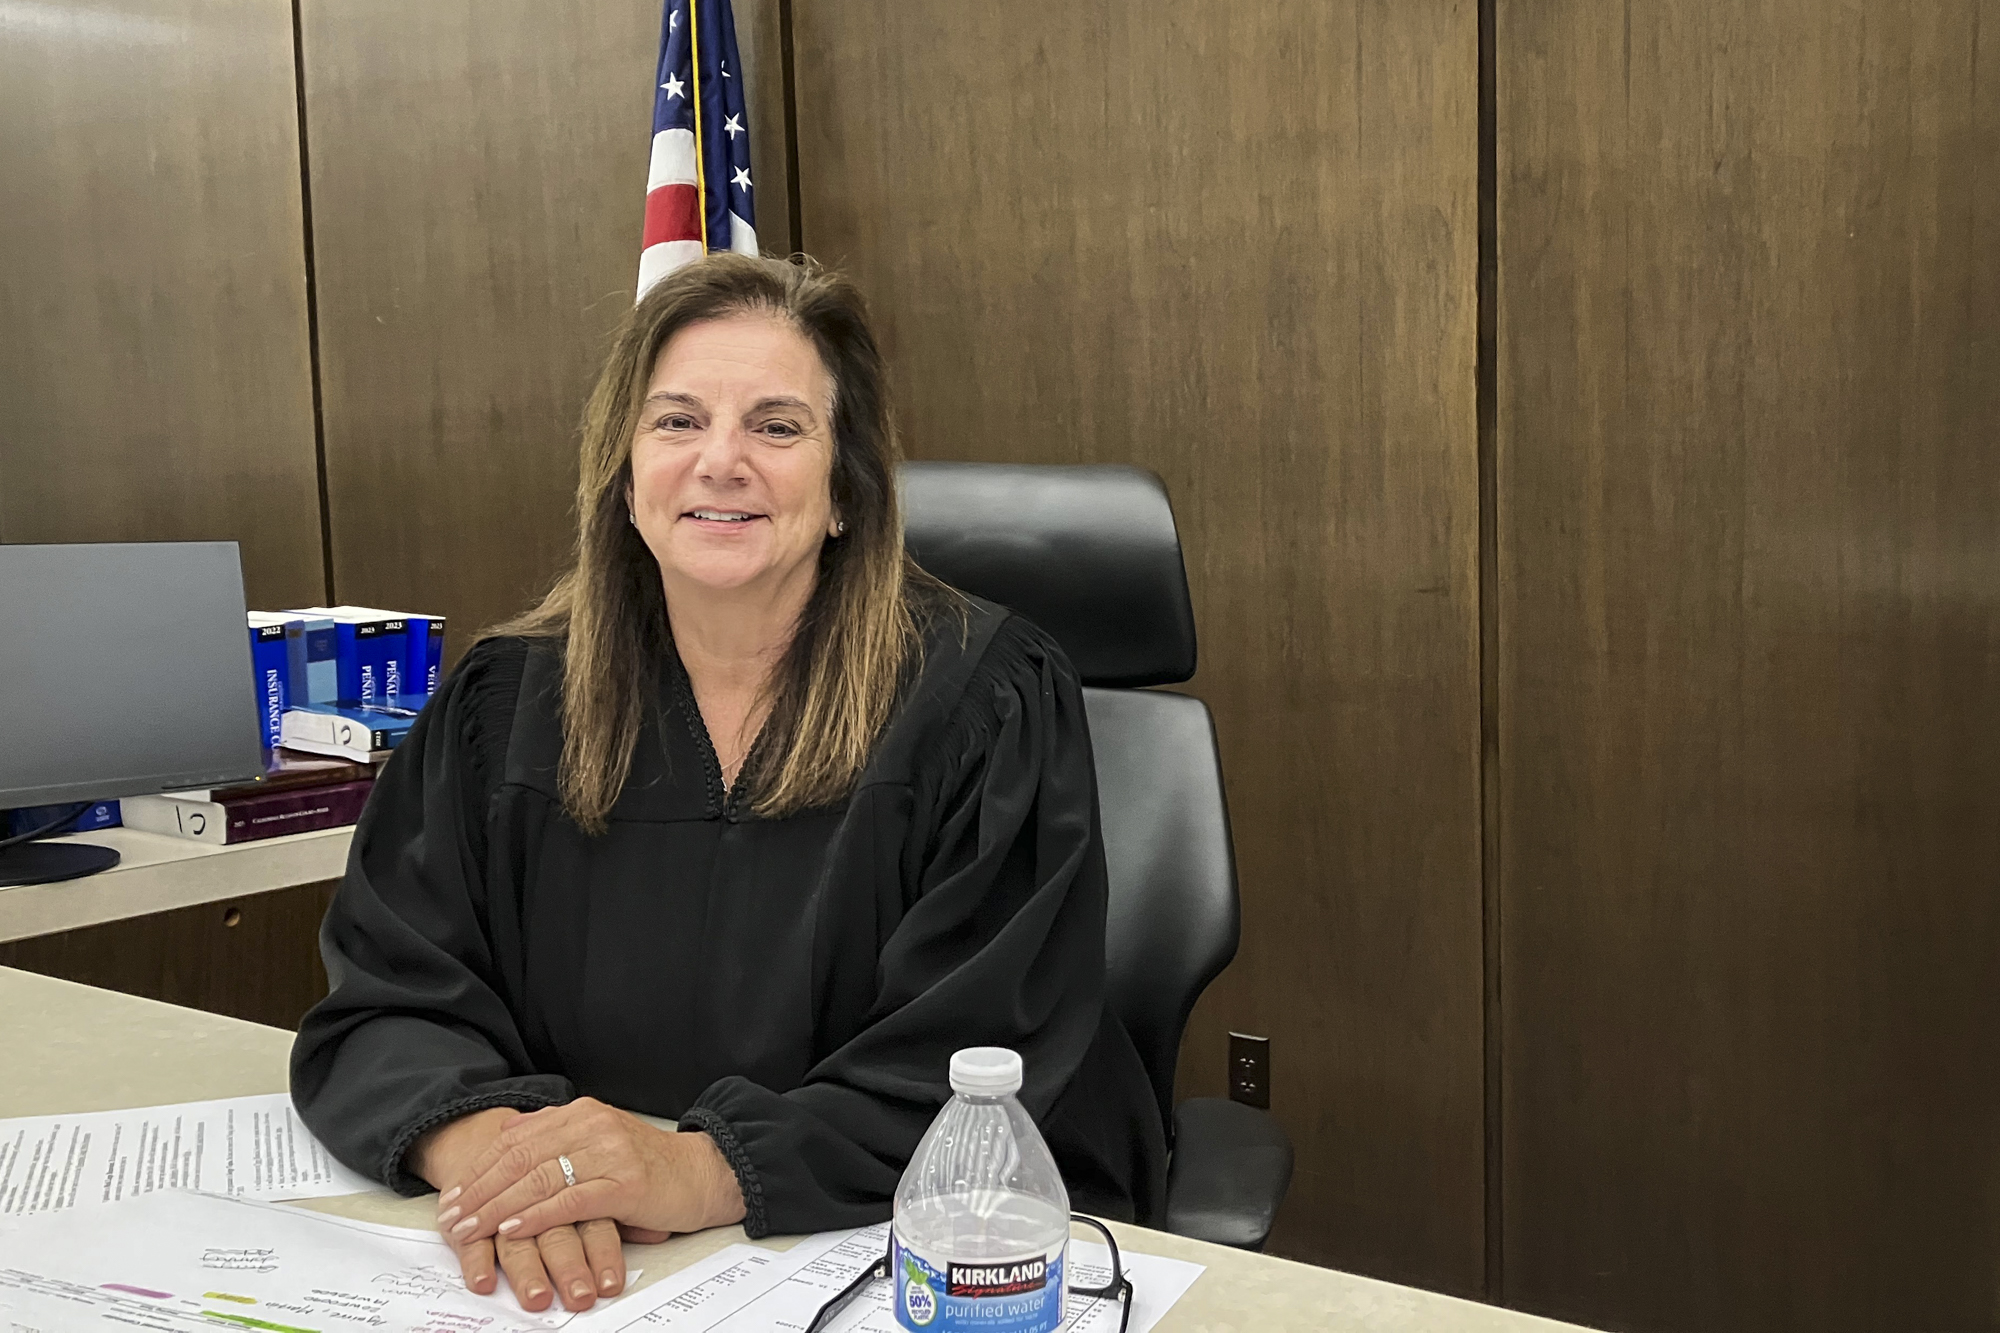 A light-skinned middle-aged woman with long brown hair and wearing black judge's robes smiles at the camera from behind a desk.